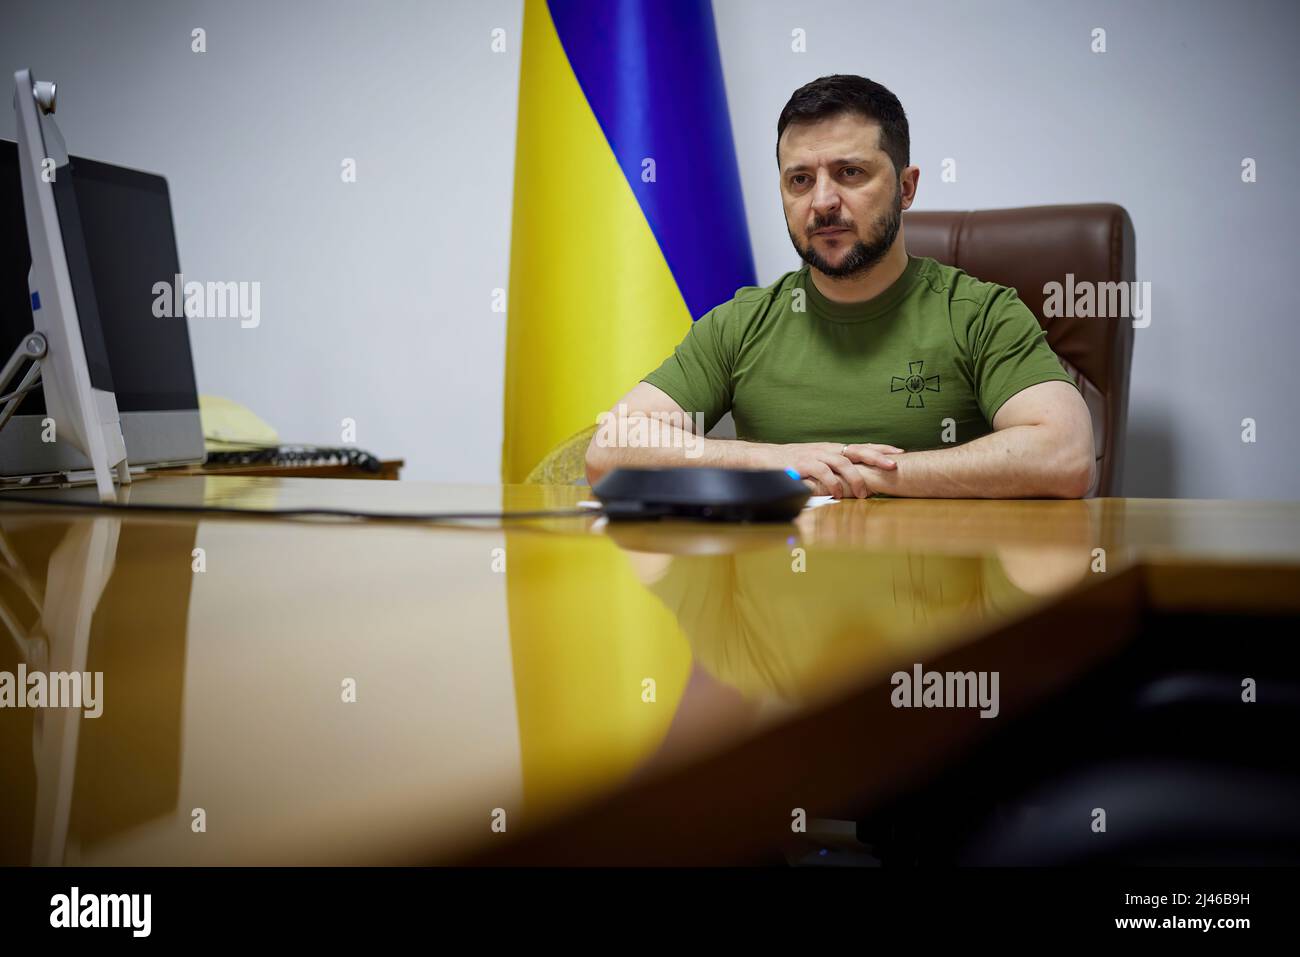 The President of Ukraine - Volodymyr Zelensky - addresses the Parliament of Lithuania from his bunker office in Kyiv, Ukraine. Zelensky stated that 'the new package of sanctions should be such that Russia does not even talk about weapons of mass destruction'. Stock Photo